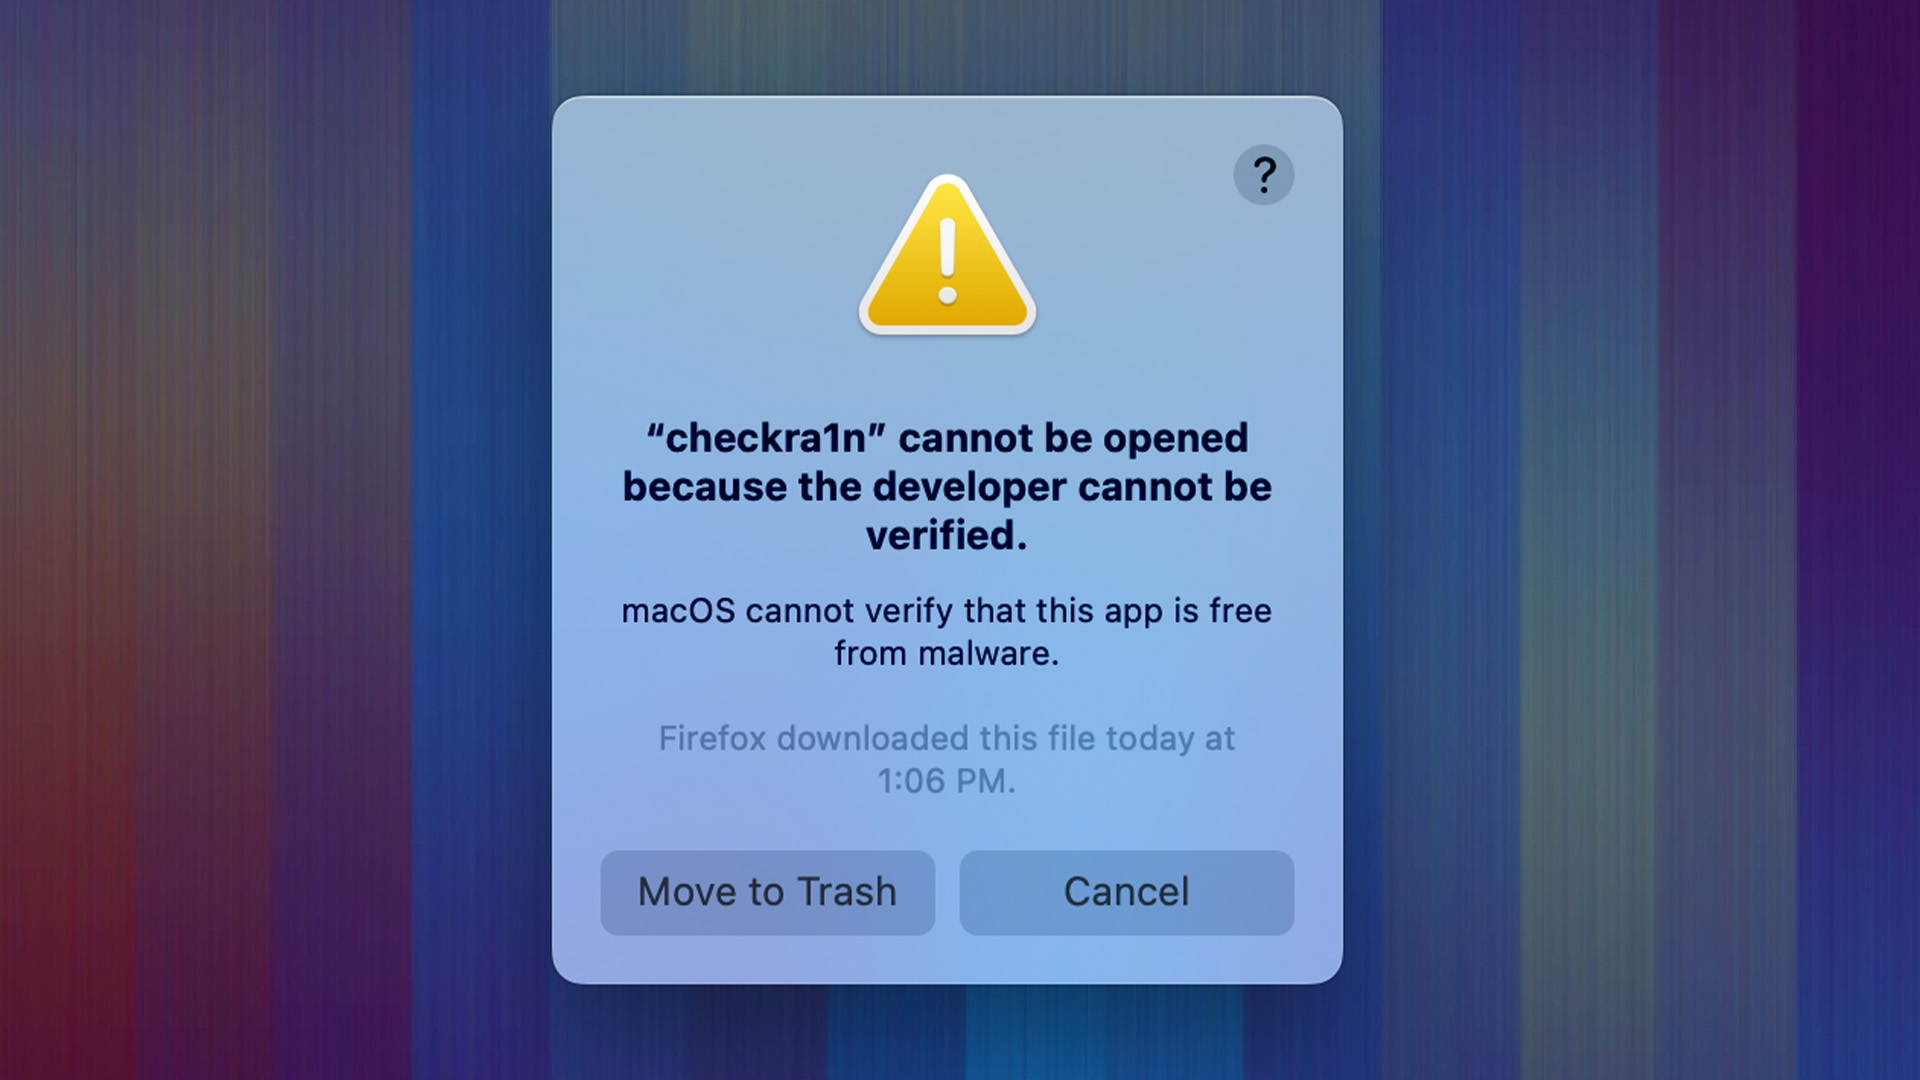 macOS check malware free featured image